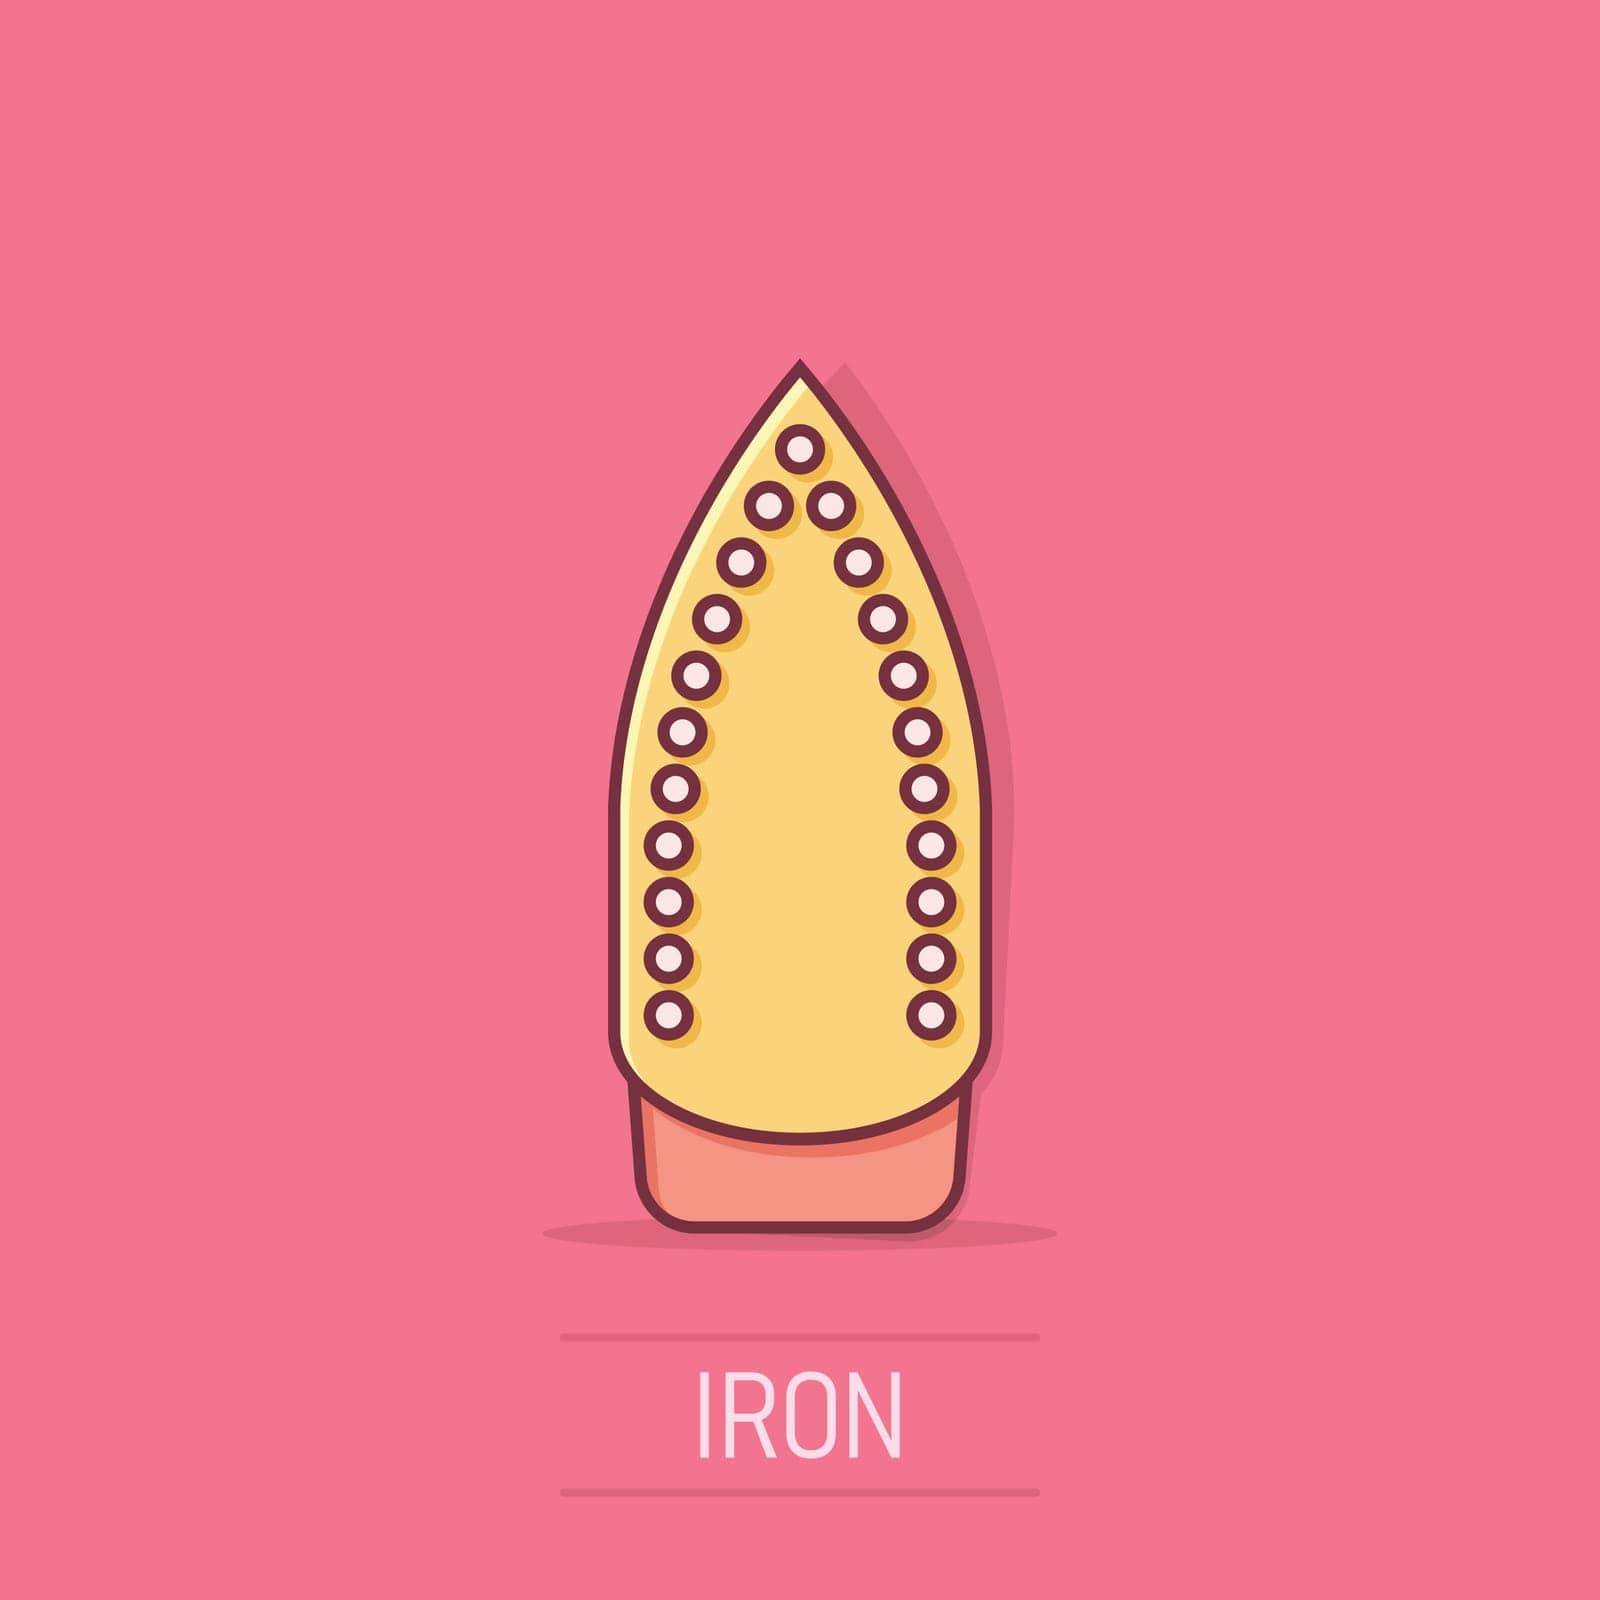 Iron icon in comic style. Laundry equipment cartoon vector illustration on isolated background. Ironing splash effect business concept. by LysenkoA